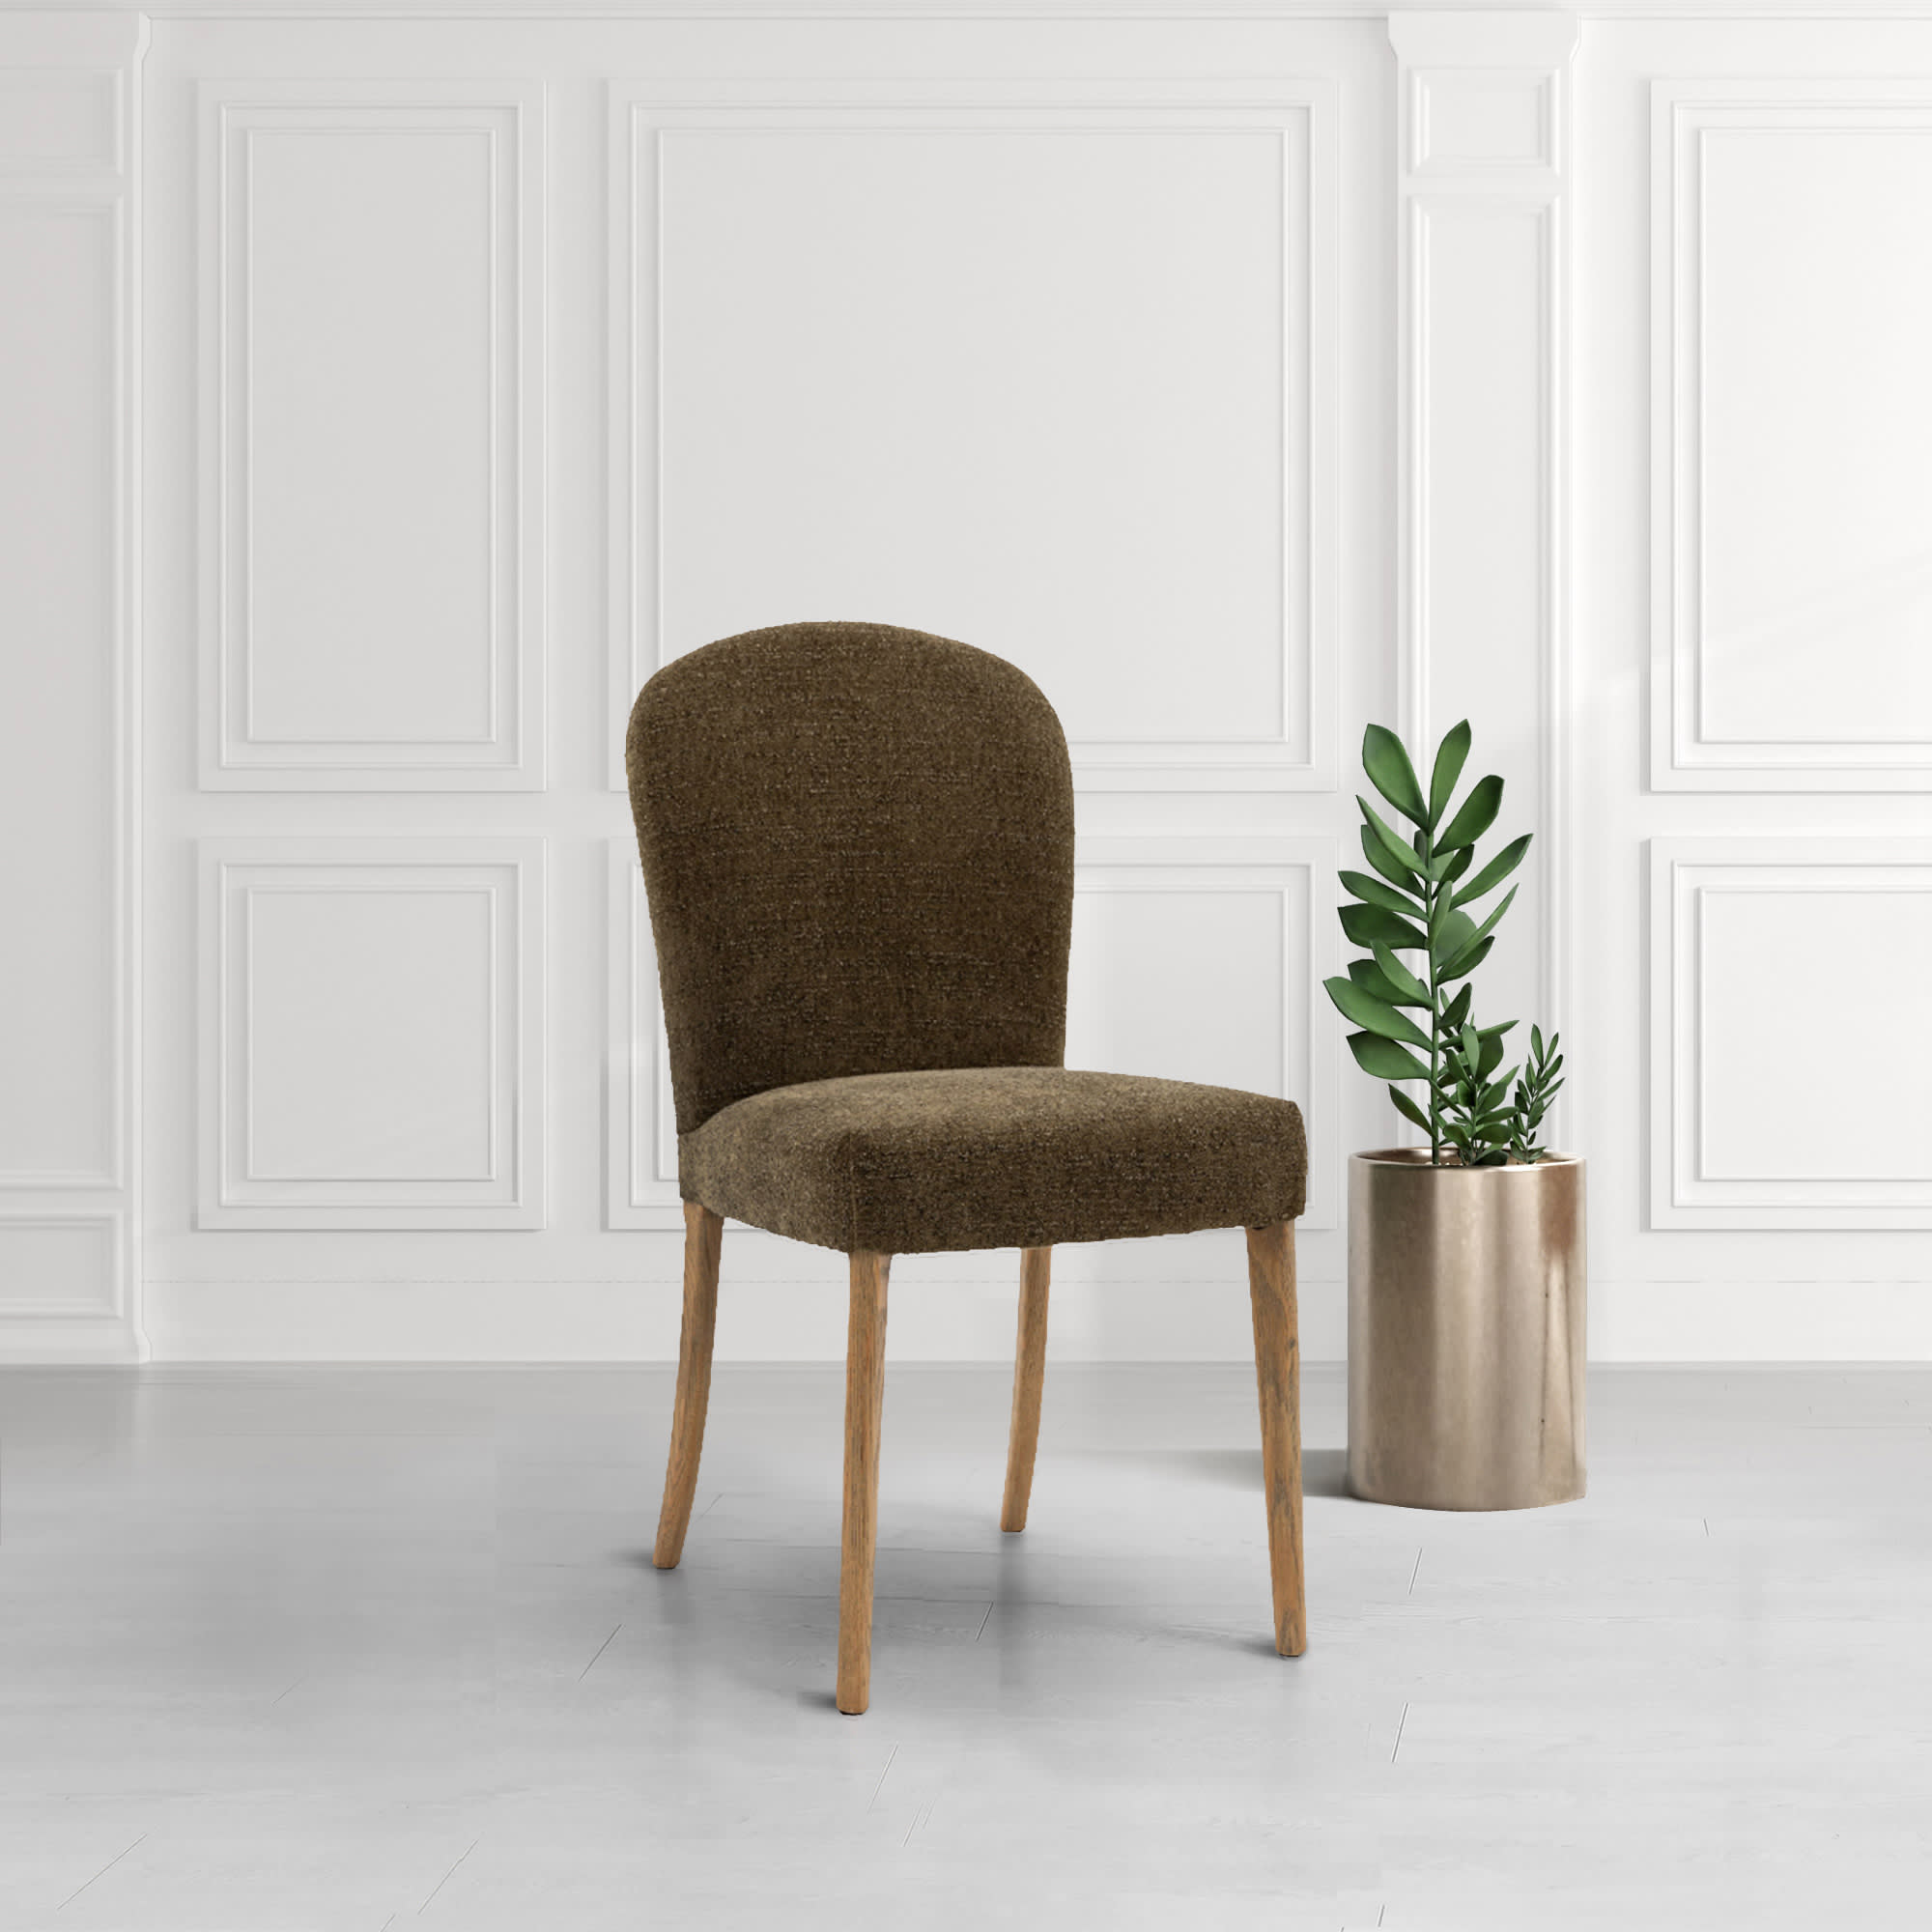 Hinton Green Upholstered Dining Chair by Gallery Direct